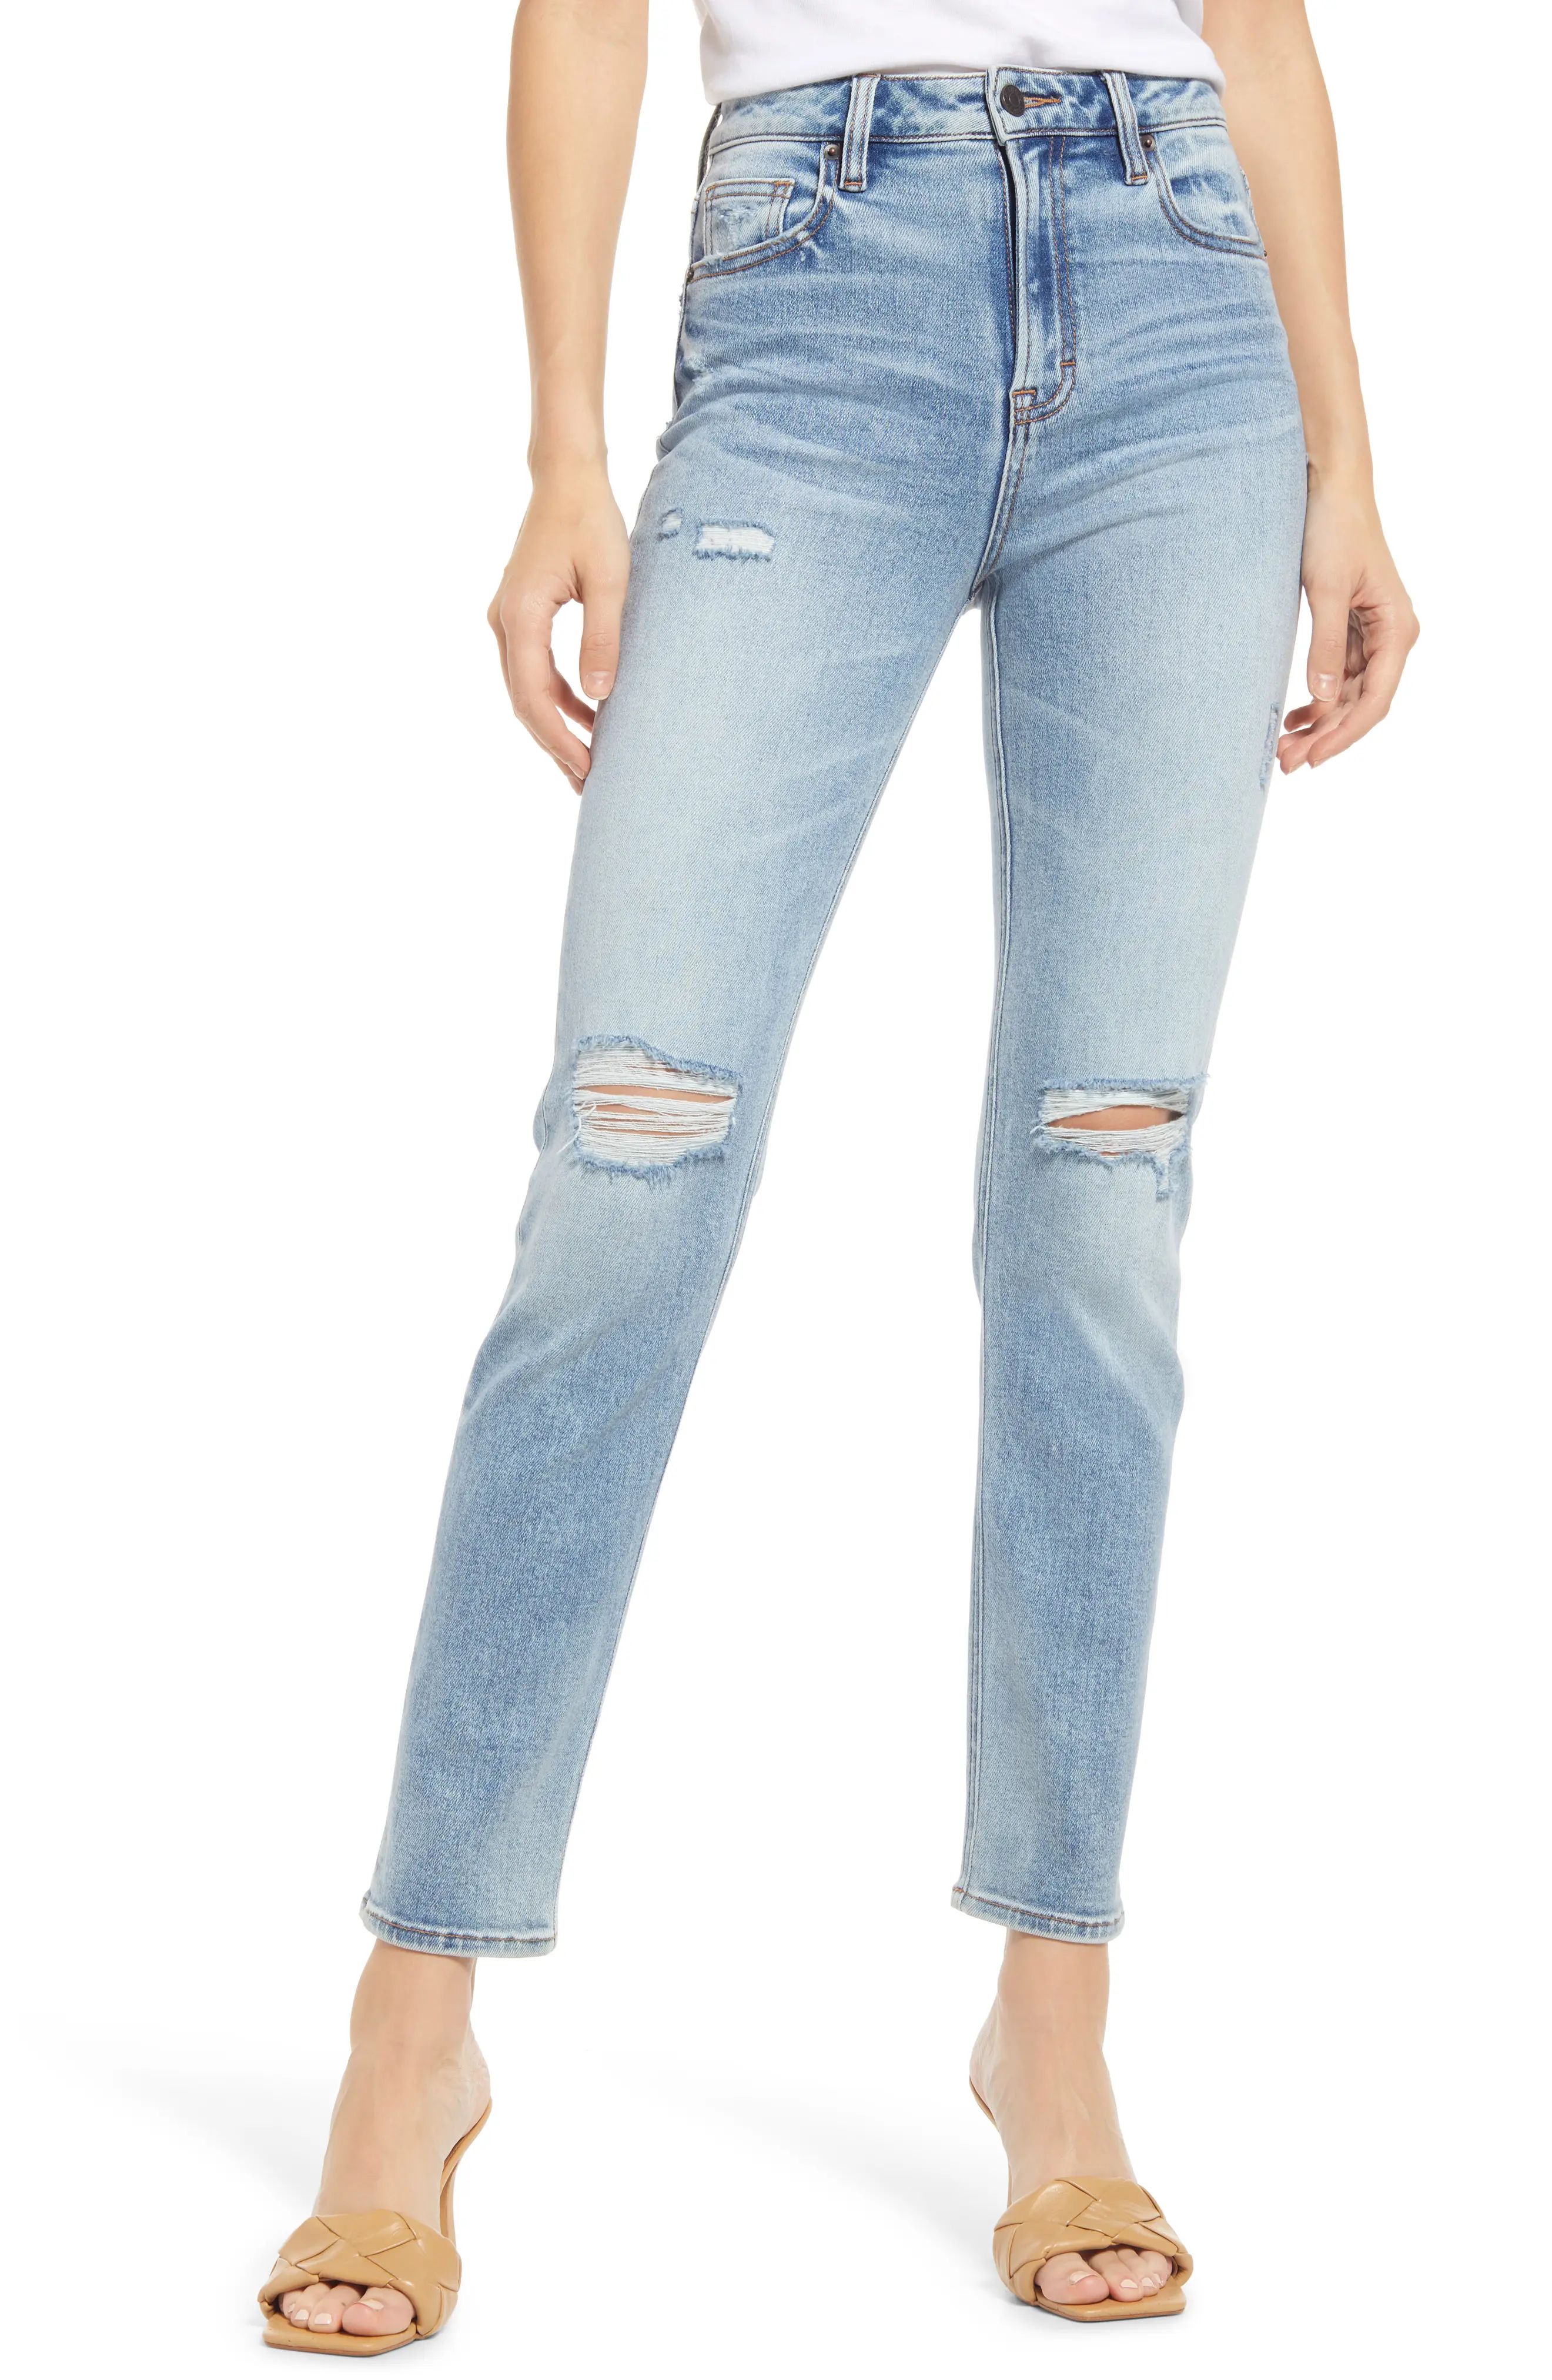 HIDDEN JEANS Ripped High Waist Tapered Mom Jeans in Light Wash at Nordstrom, Size 24 | Nordstrom